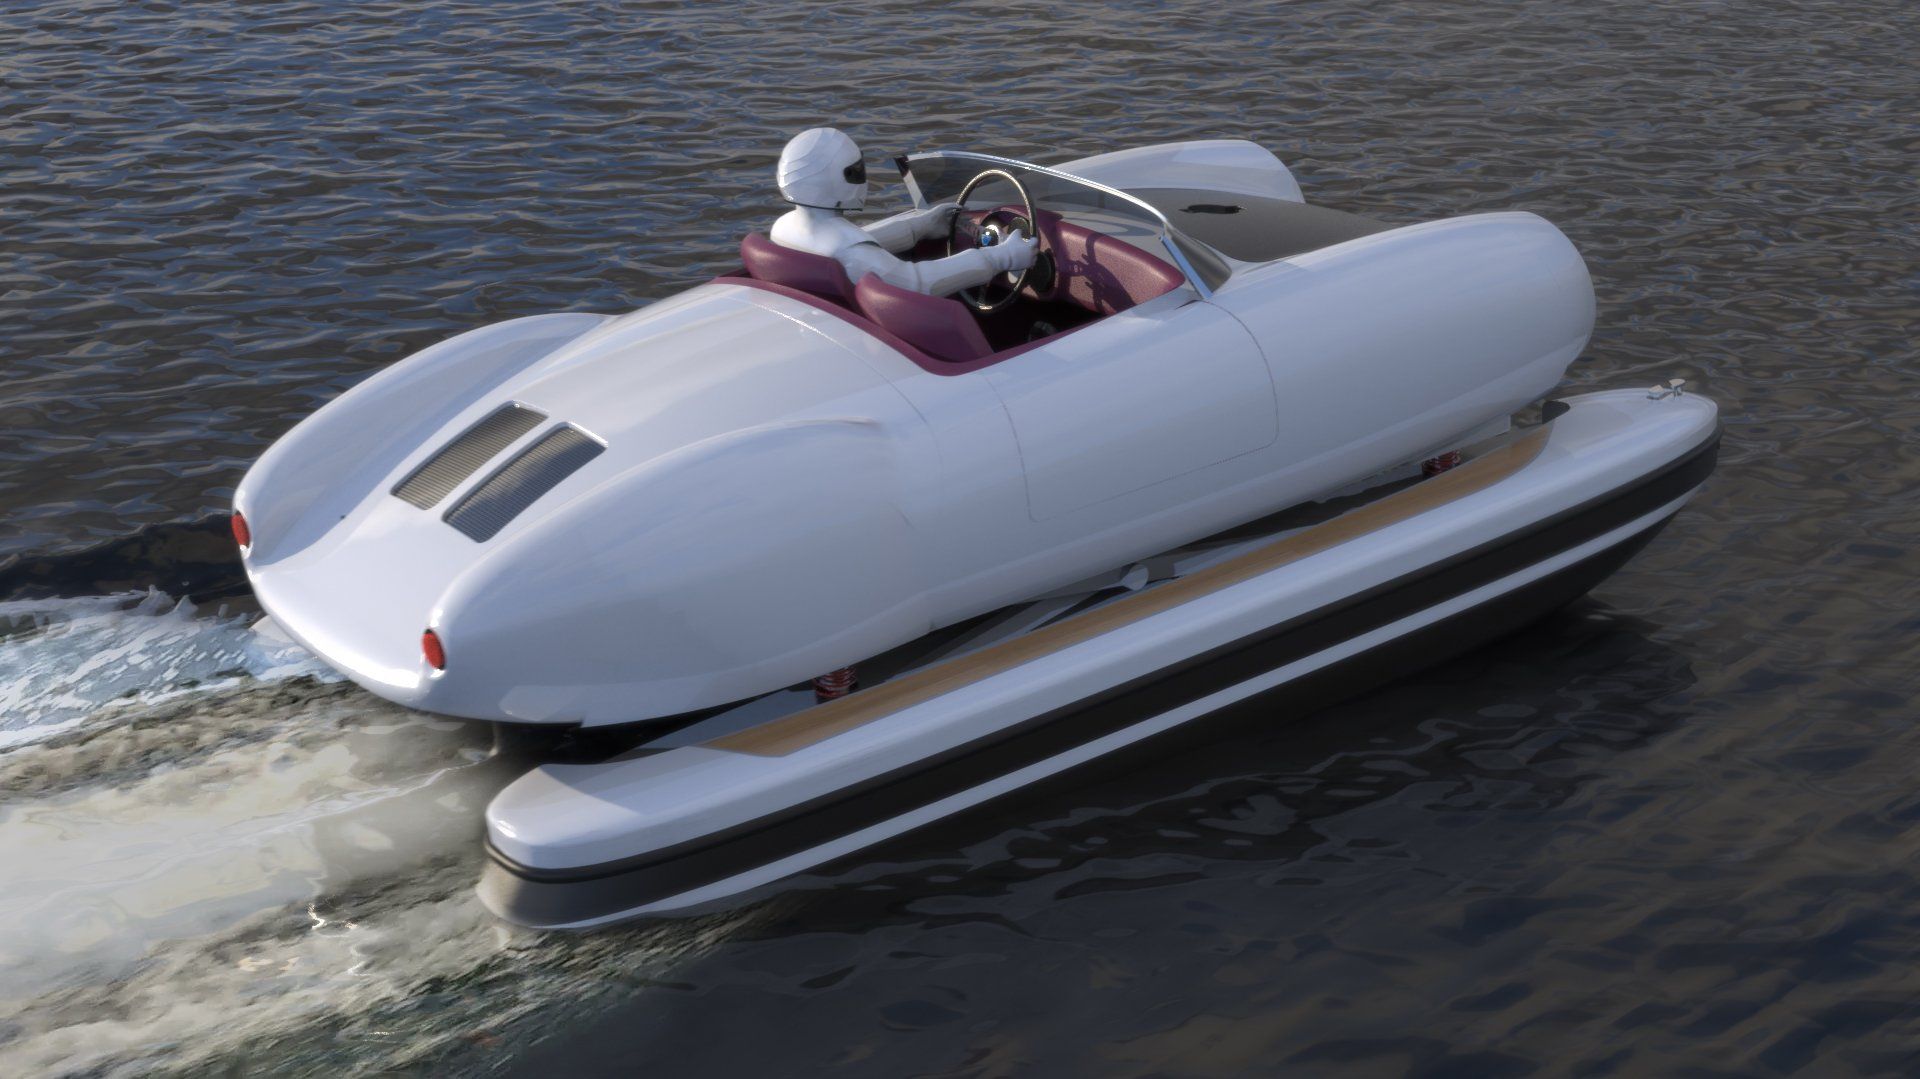 A picture of a resto-modded boat car designed by Floating Motors.